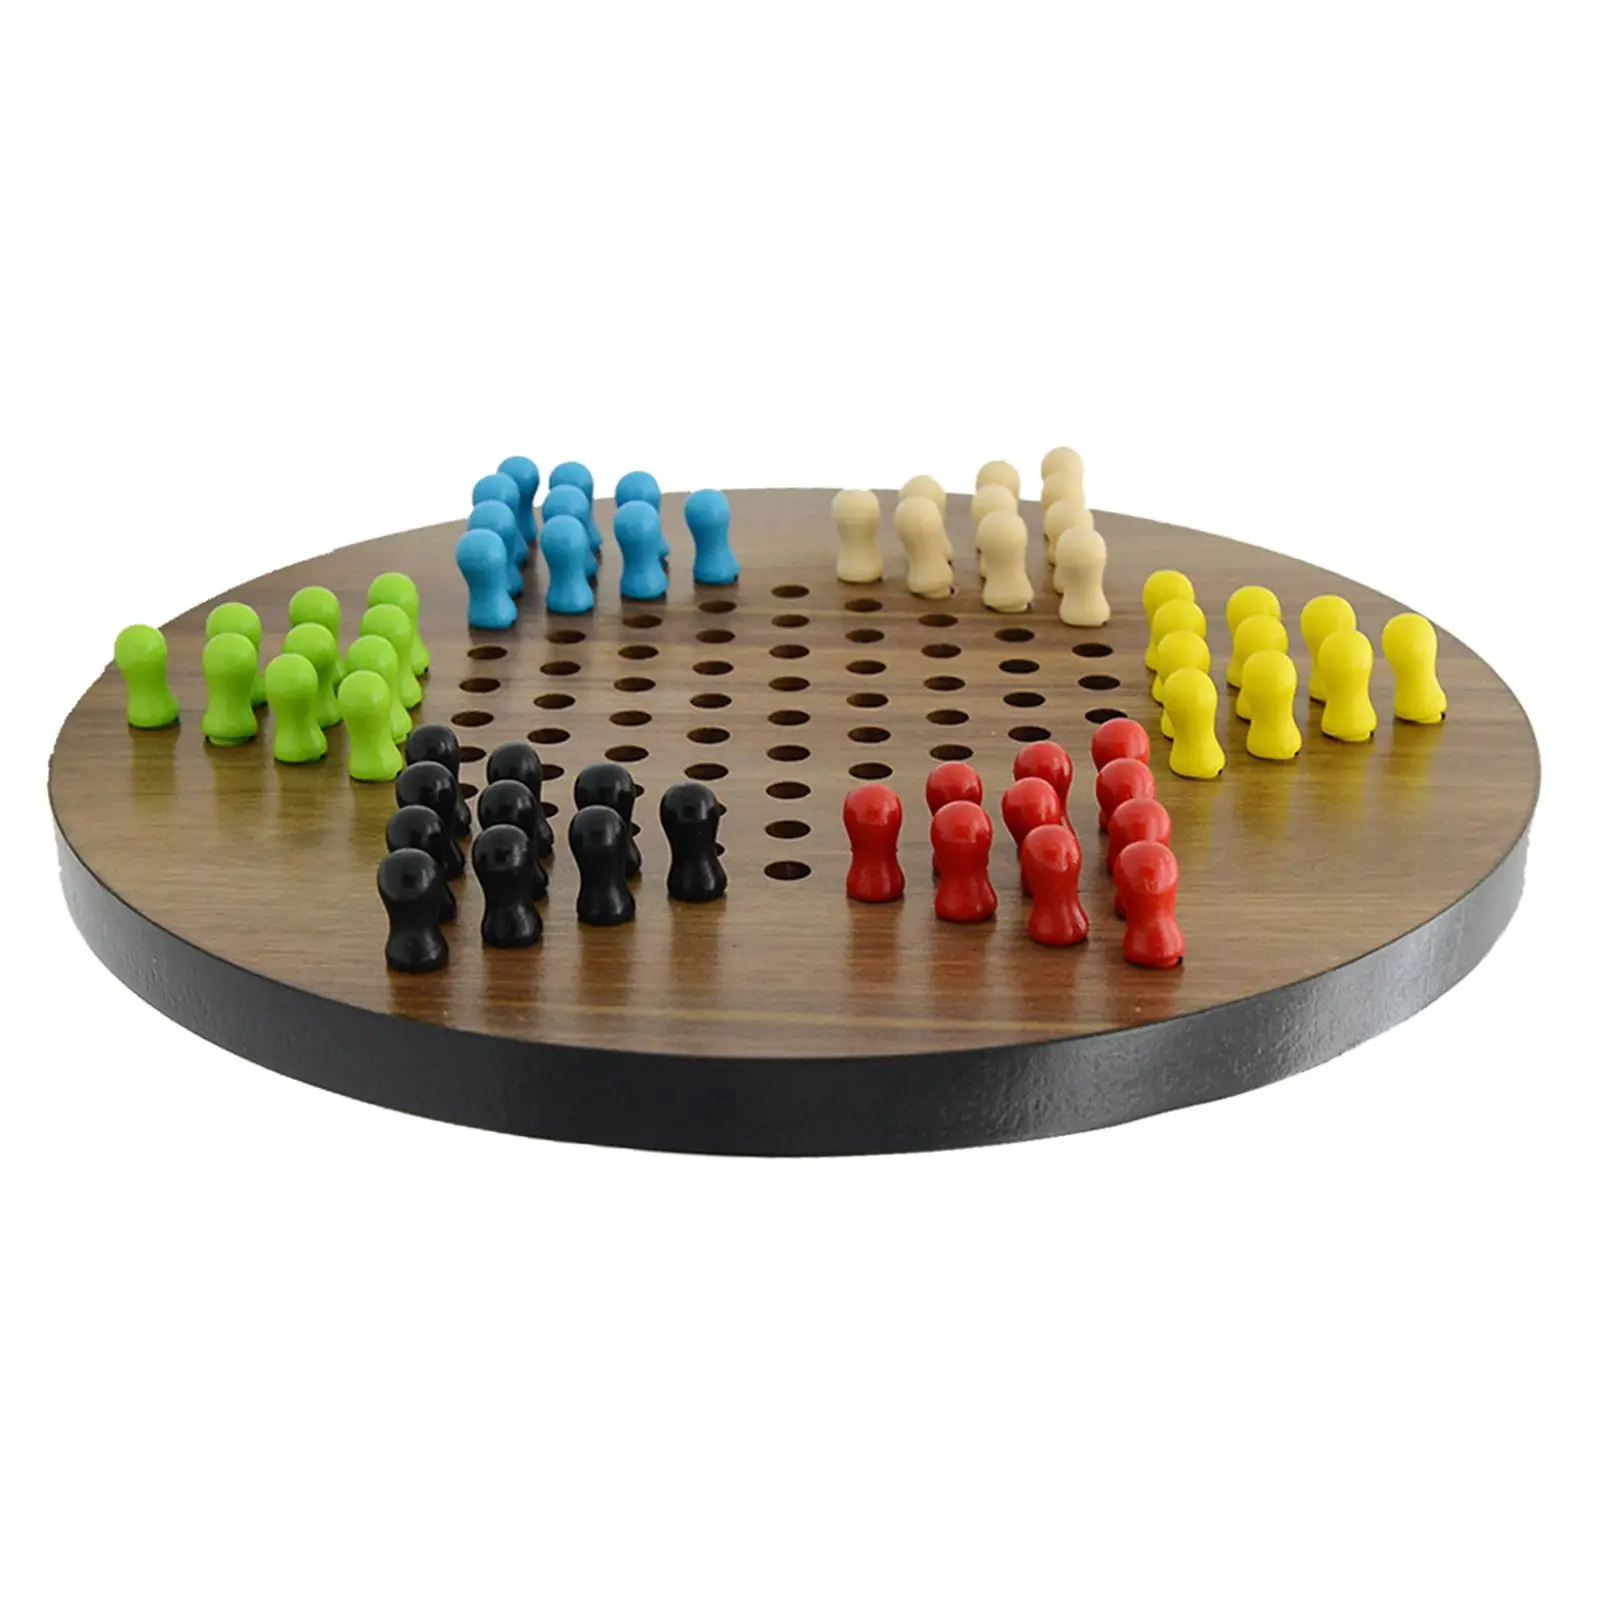 Chinese Checkers Game Classic Strategy Chinese Checkers Game Set Includes 60 Colorful Chinese Checkers with Marbles for Toddler